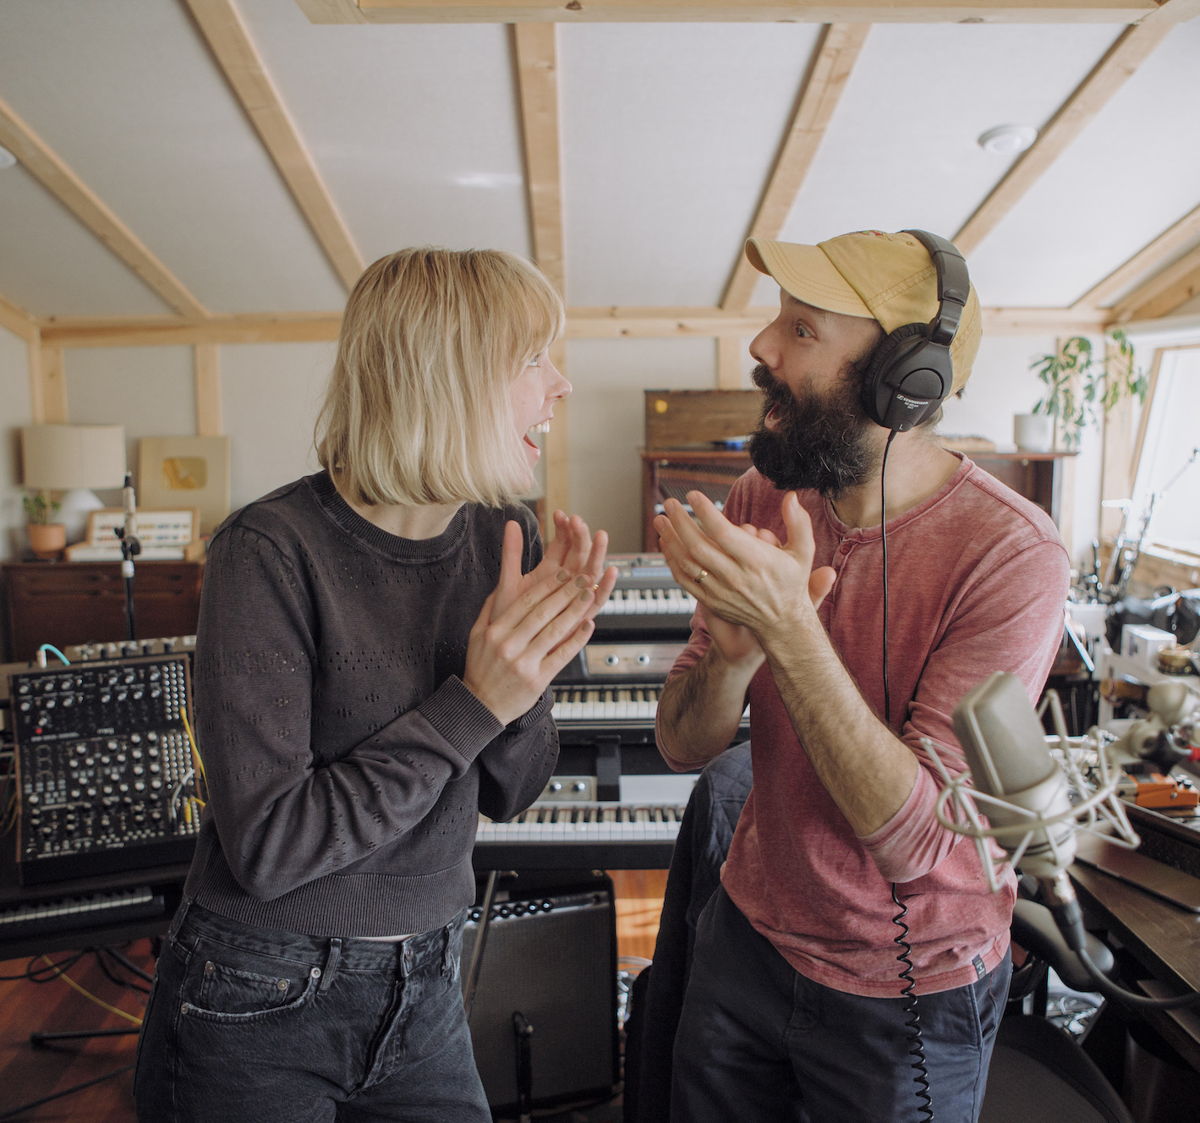  Pomplamoose in the studio. Jack Conte with his pair of Sennheiser HD 280 PRO headphones (photo courtesy Nataly Dawn)